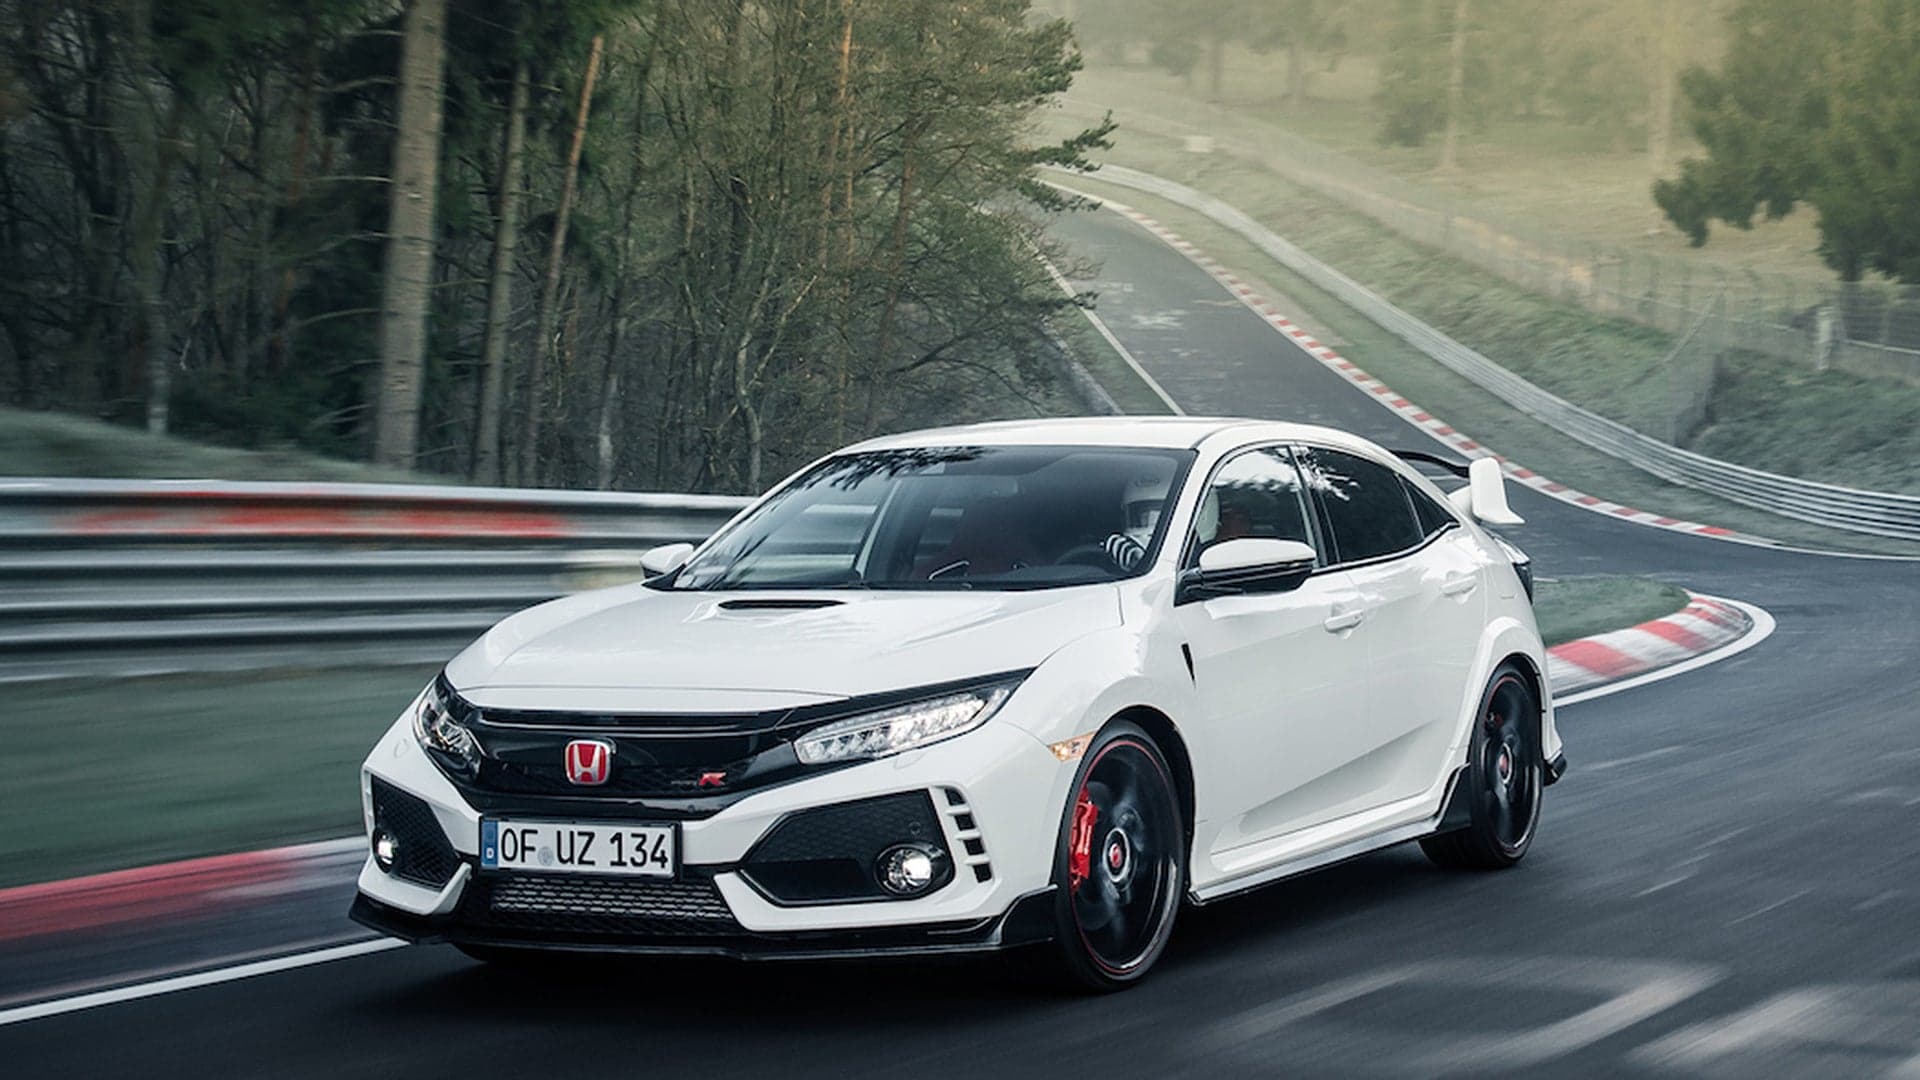 2018 Honda Civic Type R Review: This $35,000 Front-Drive Hot Hatch Impresses Like a Supercar